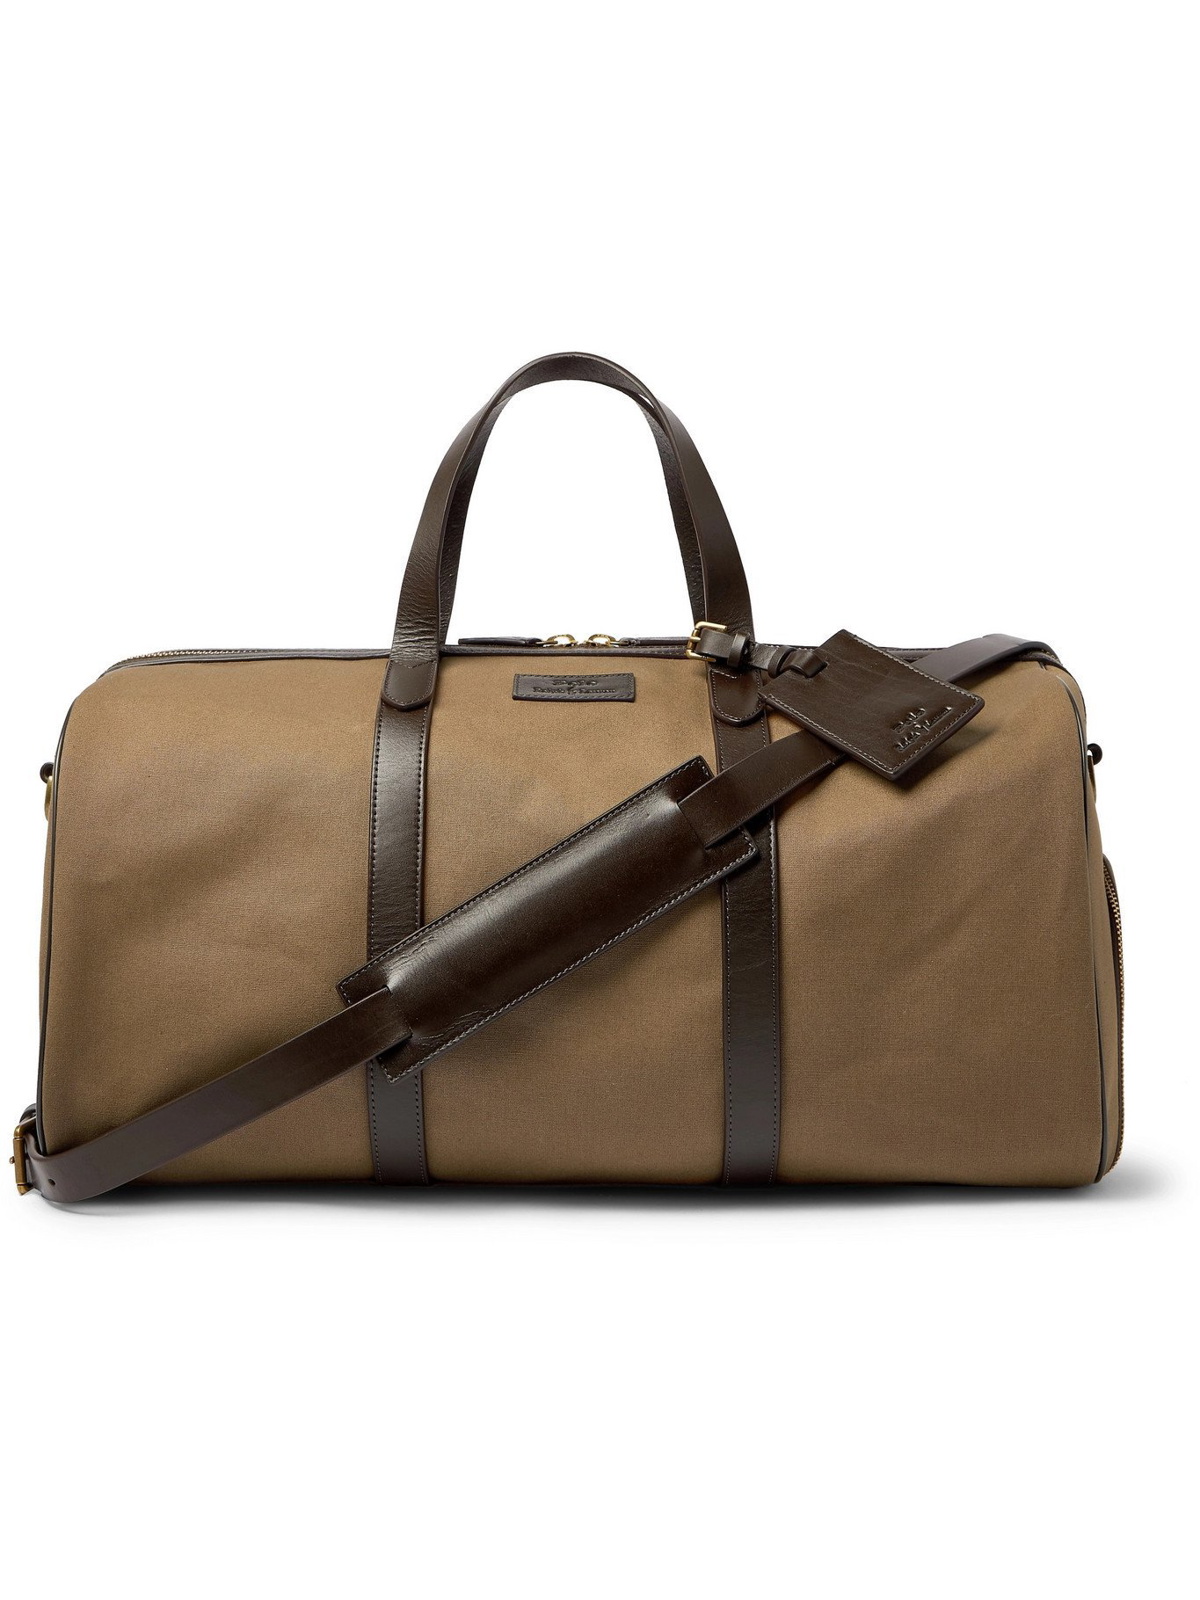 POLO RALPH LAUREN Leather-Trimmed Canvas Weekend Bag for Men